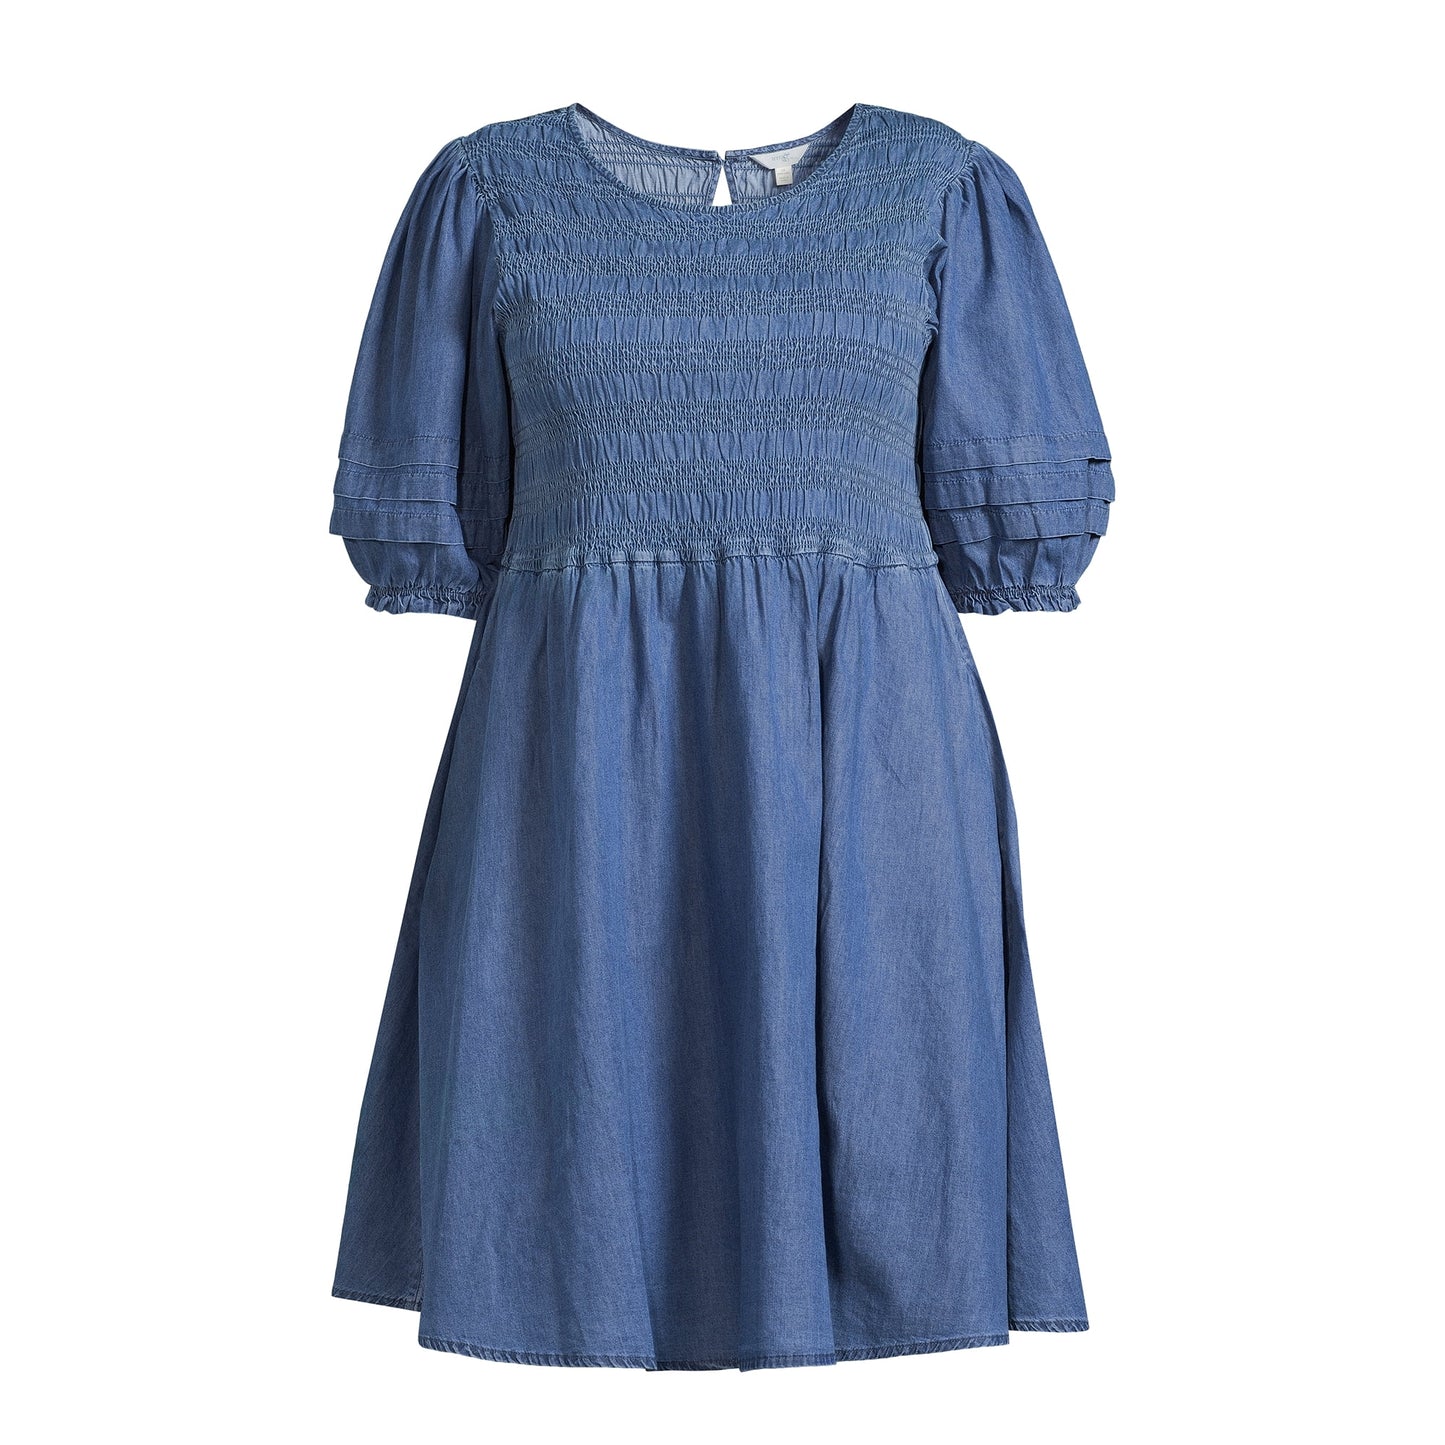 Terra & Sky Women's Plus Smocked Dress with Puff Sleeves